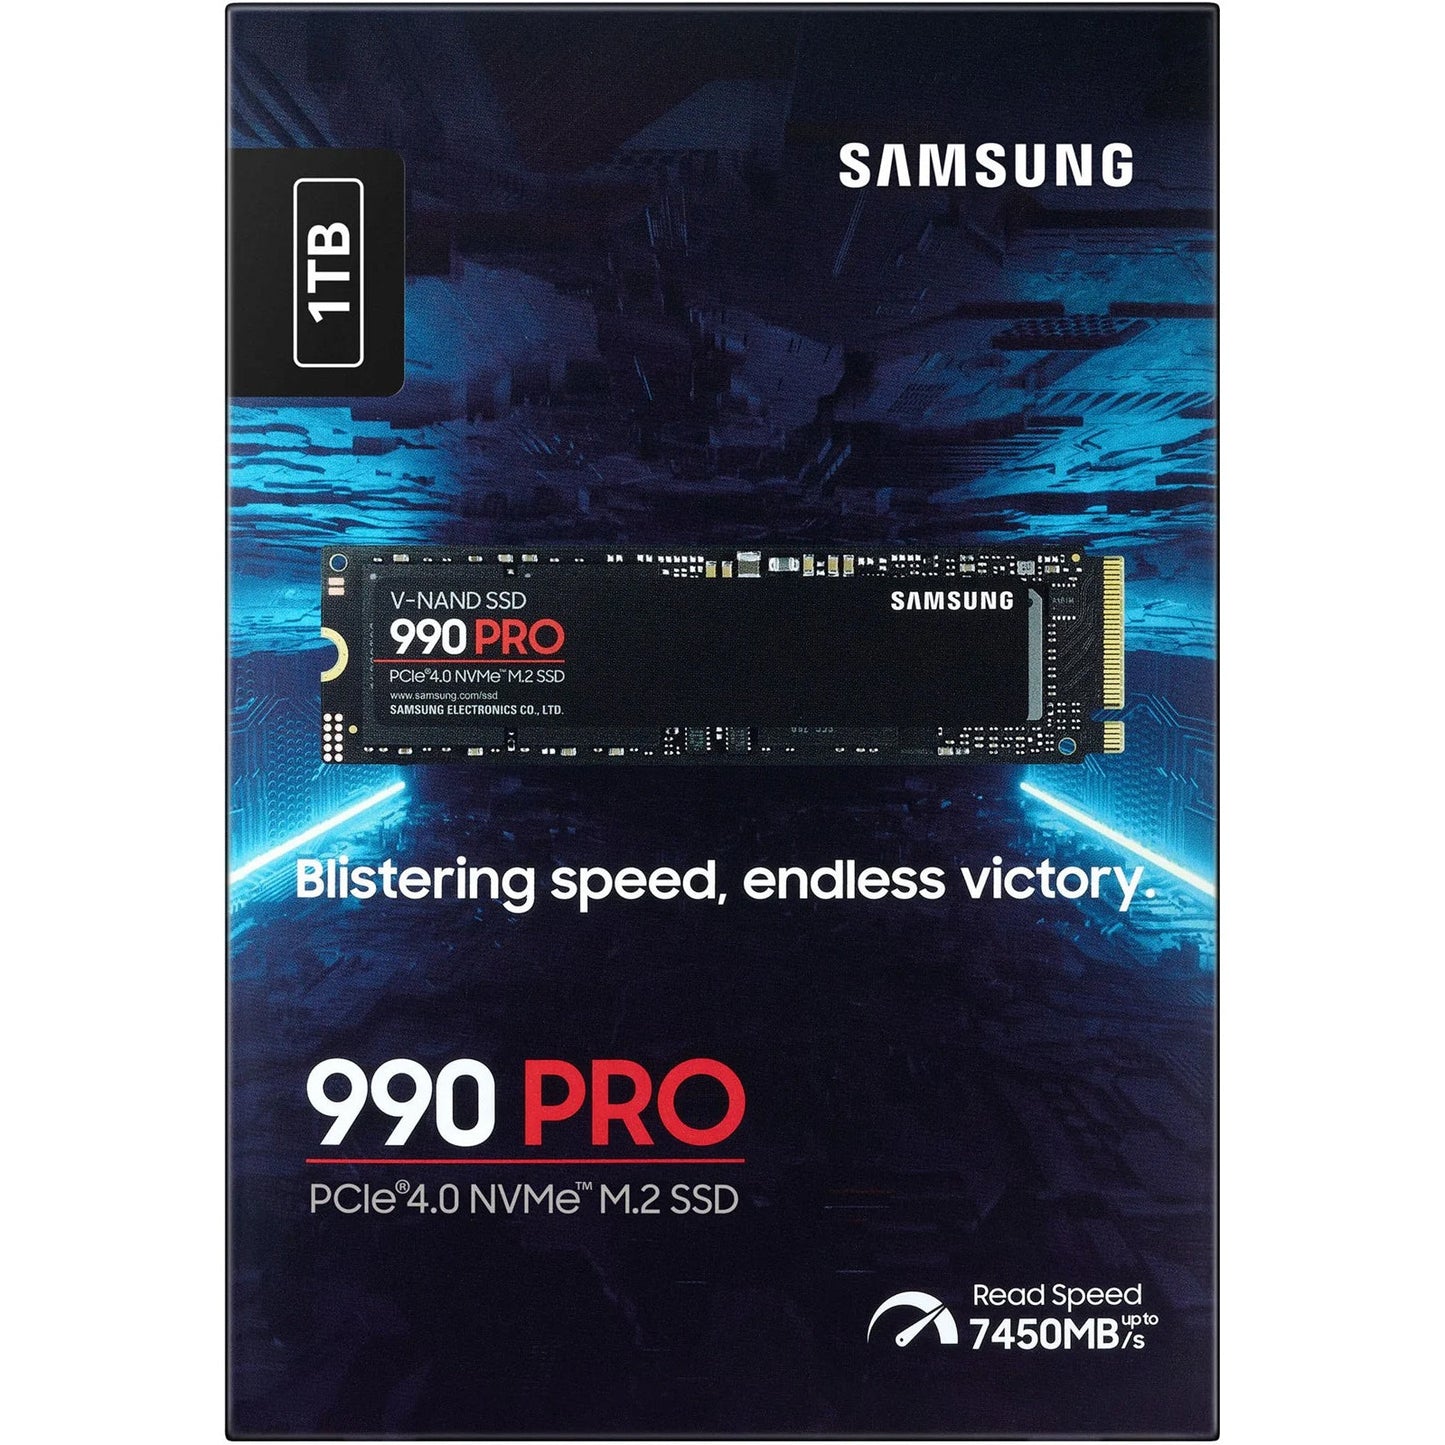 Samsung 990 PRO 1TB PCIe 4.0 NVMe M.2 (2280) Internal Solid State Drive (SSD) up to 7450 MB/s